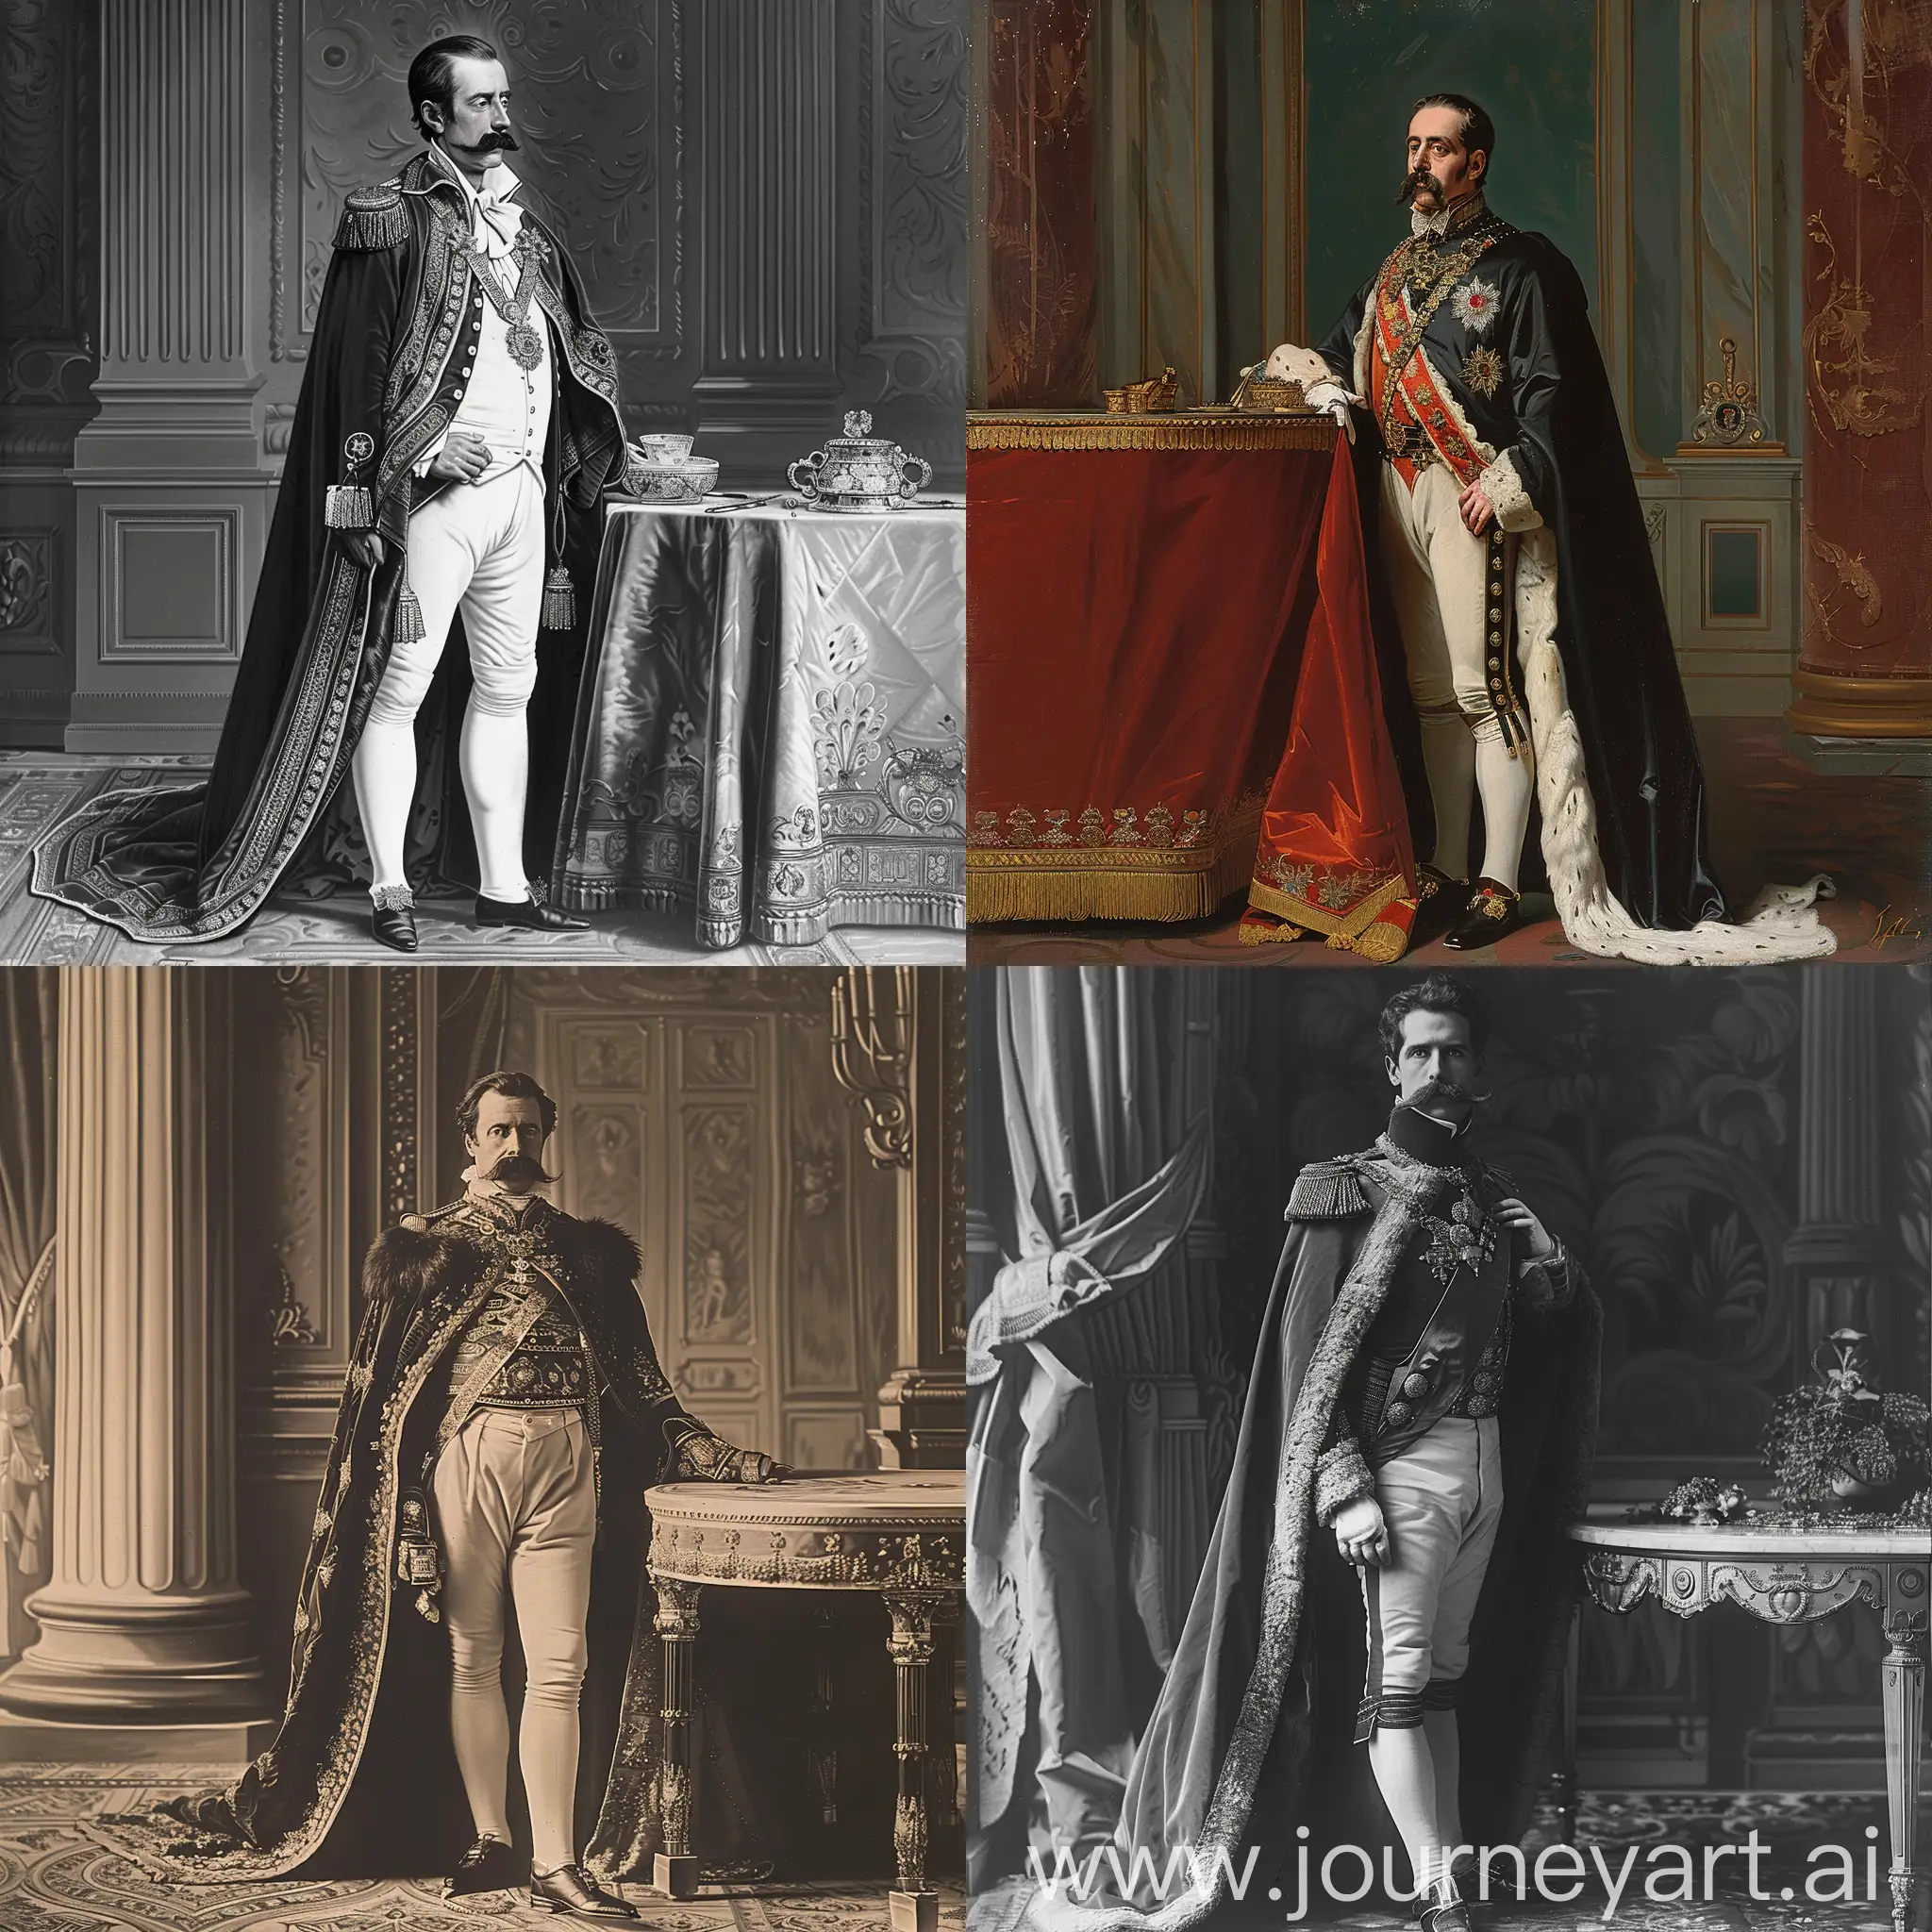 Napoleon-III-in-Regal-Attire-First-President-and-Last-Emperor-of-France